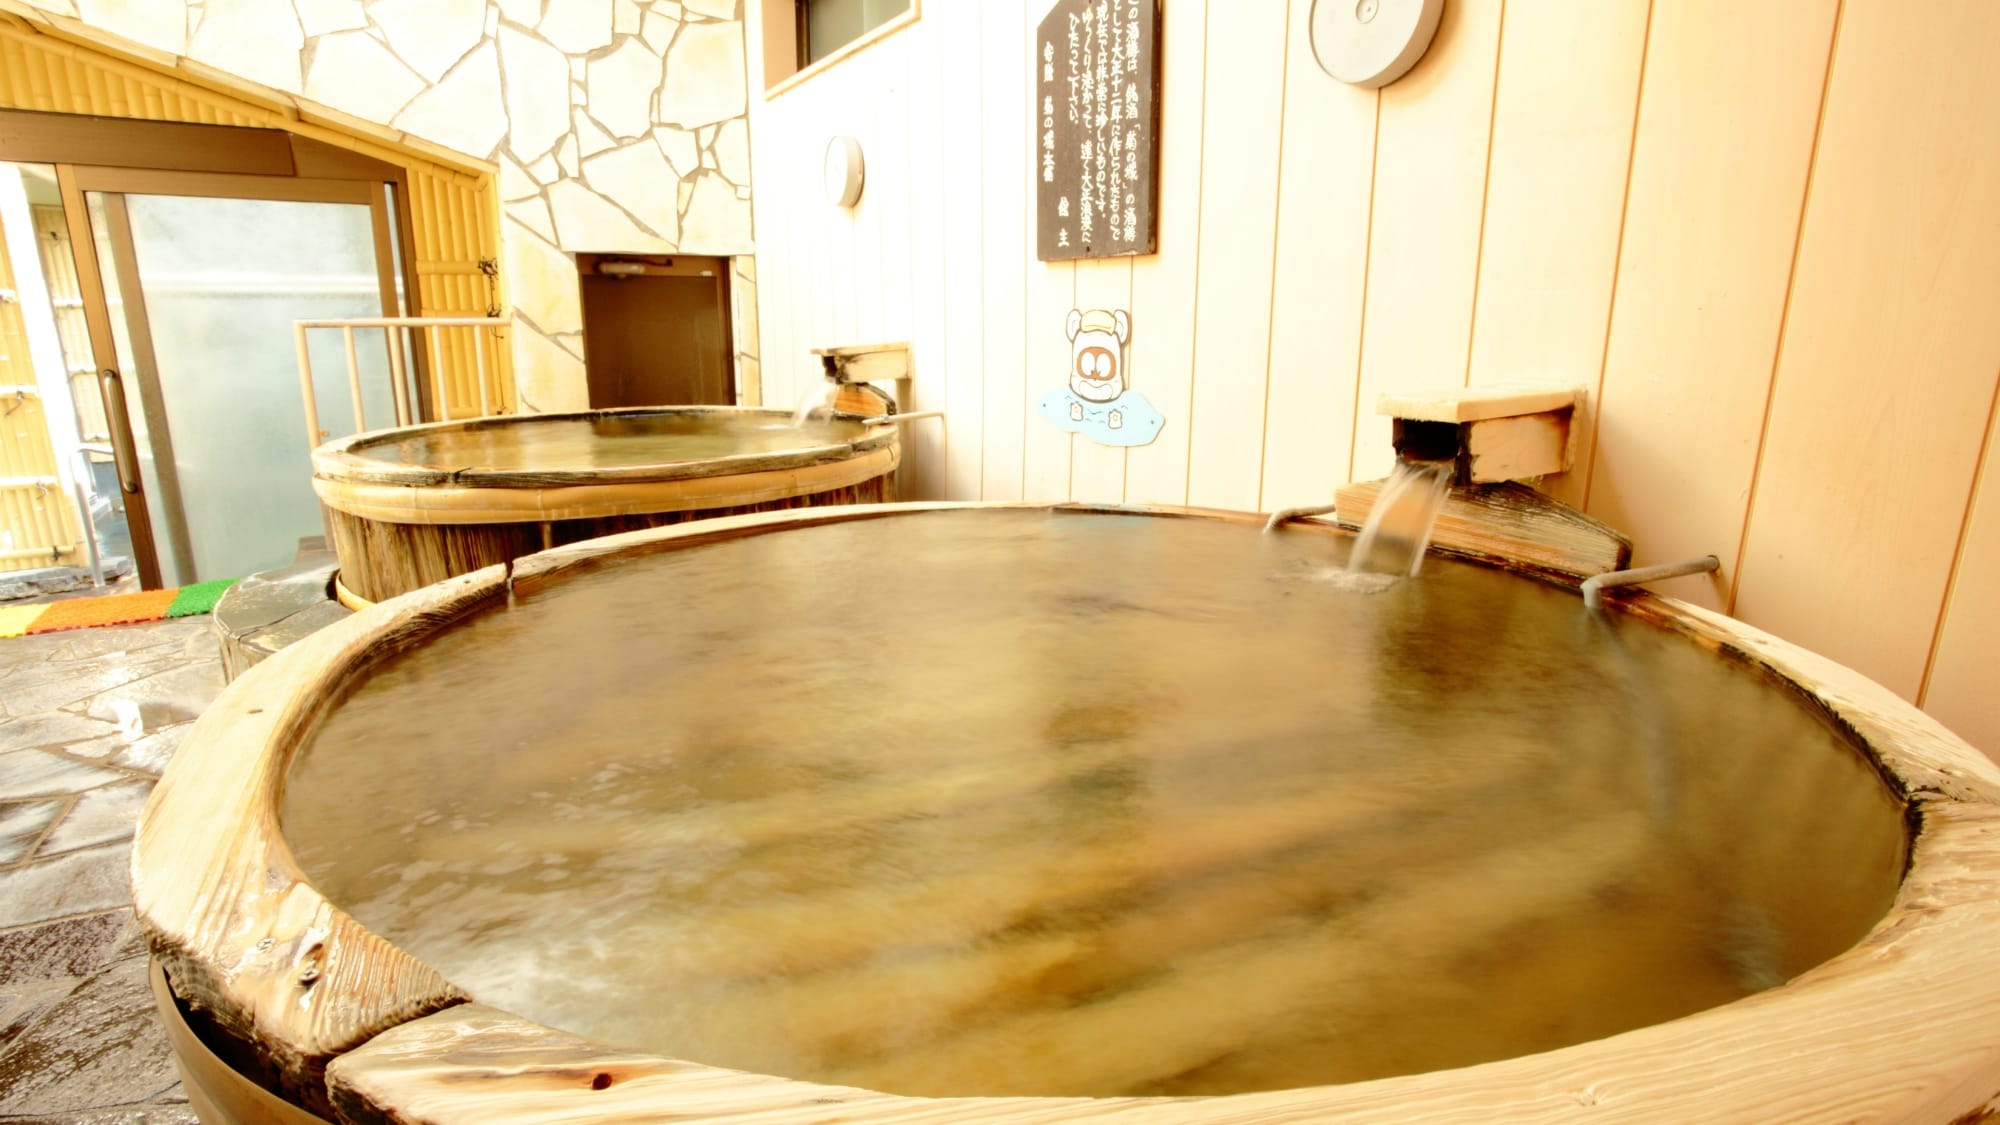 The sake barrel bath that we are proud of is a very rare sake barrel made in the 12th year of the Taisho era. Please immerse yourself in the Taisho romance.